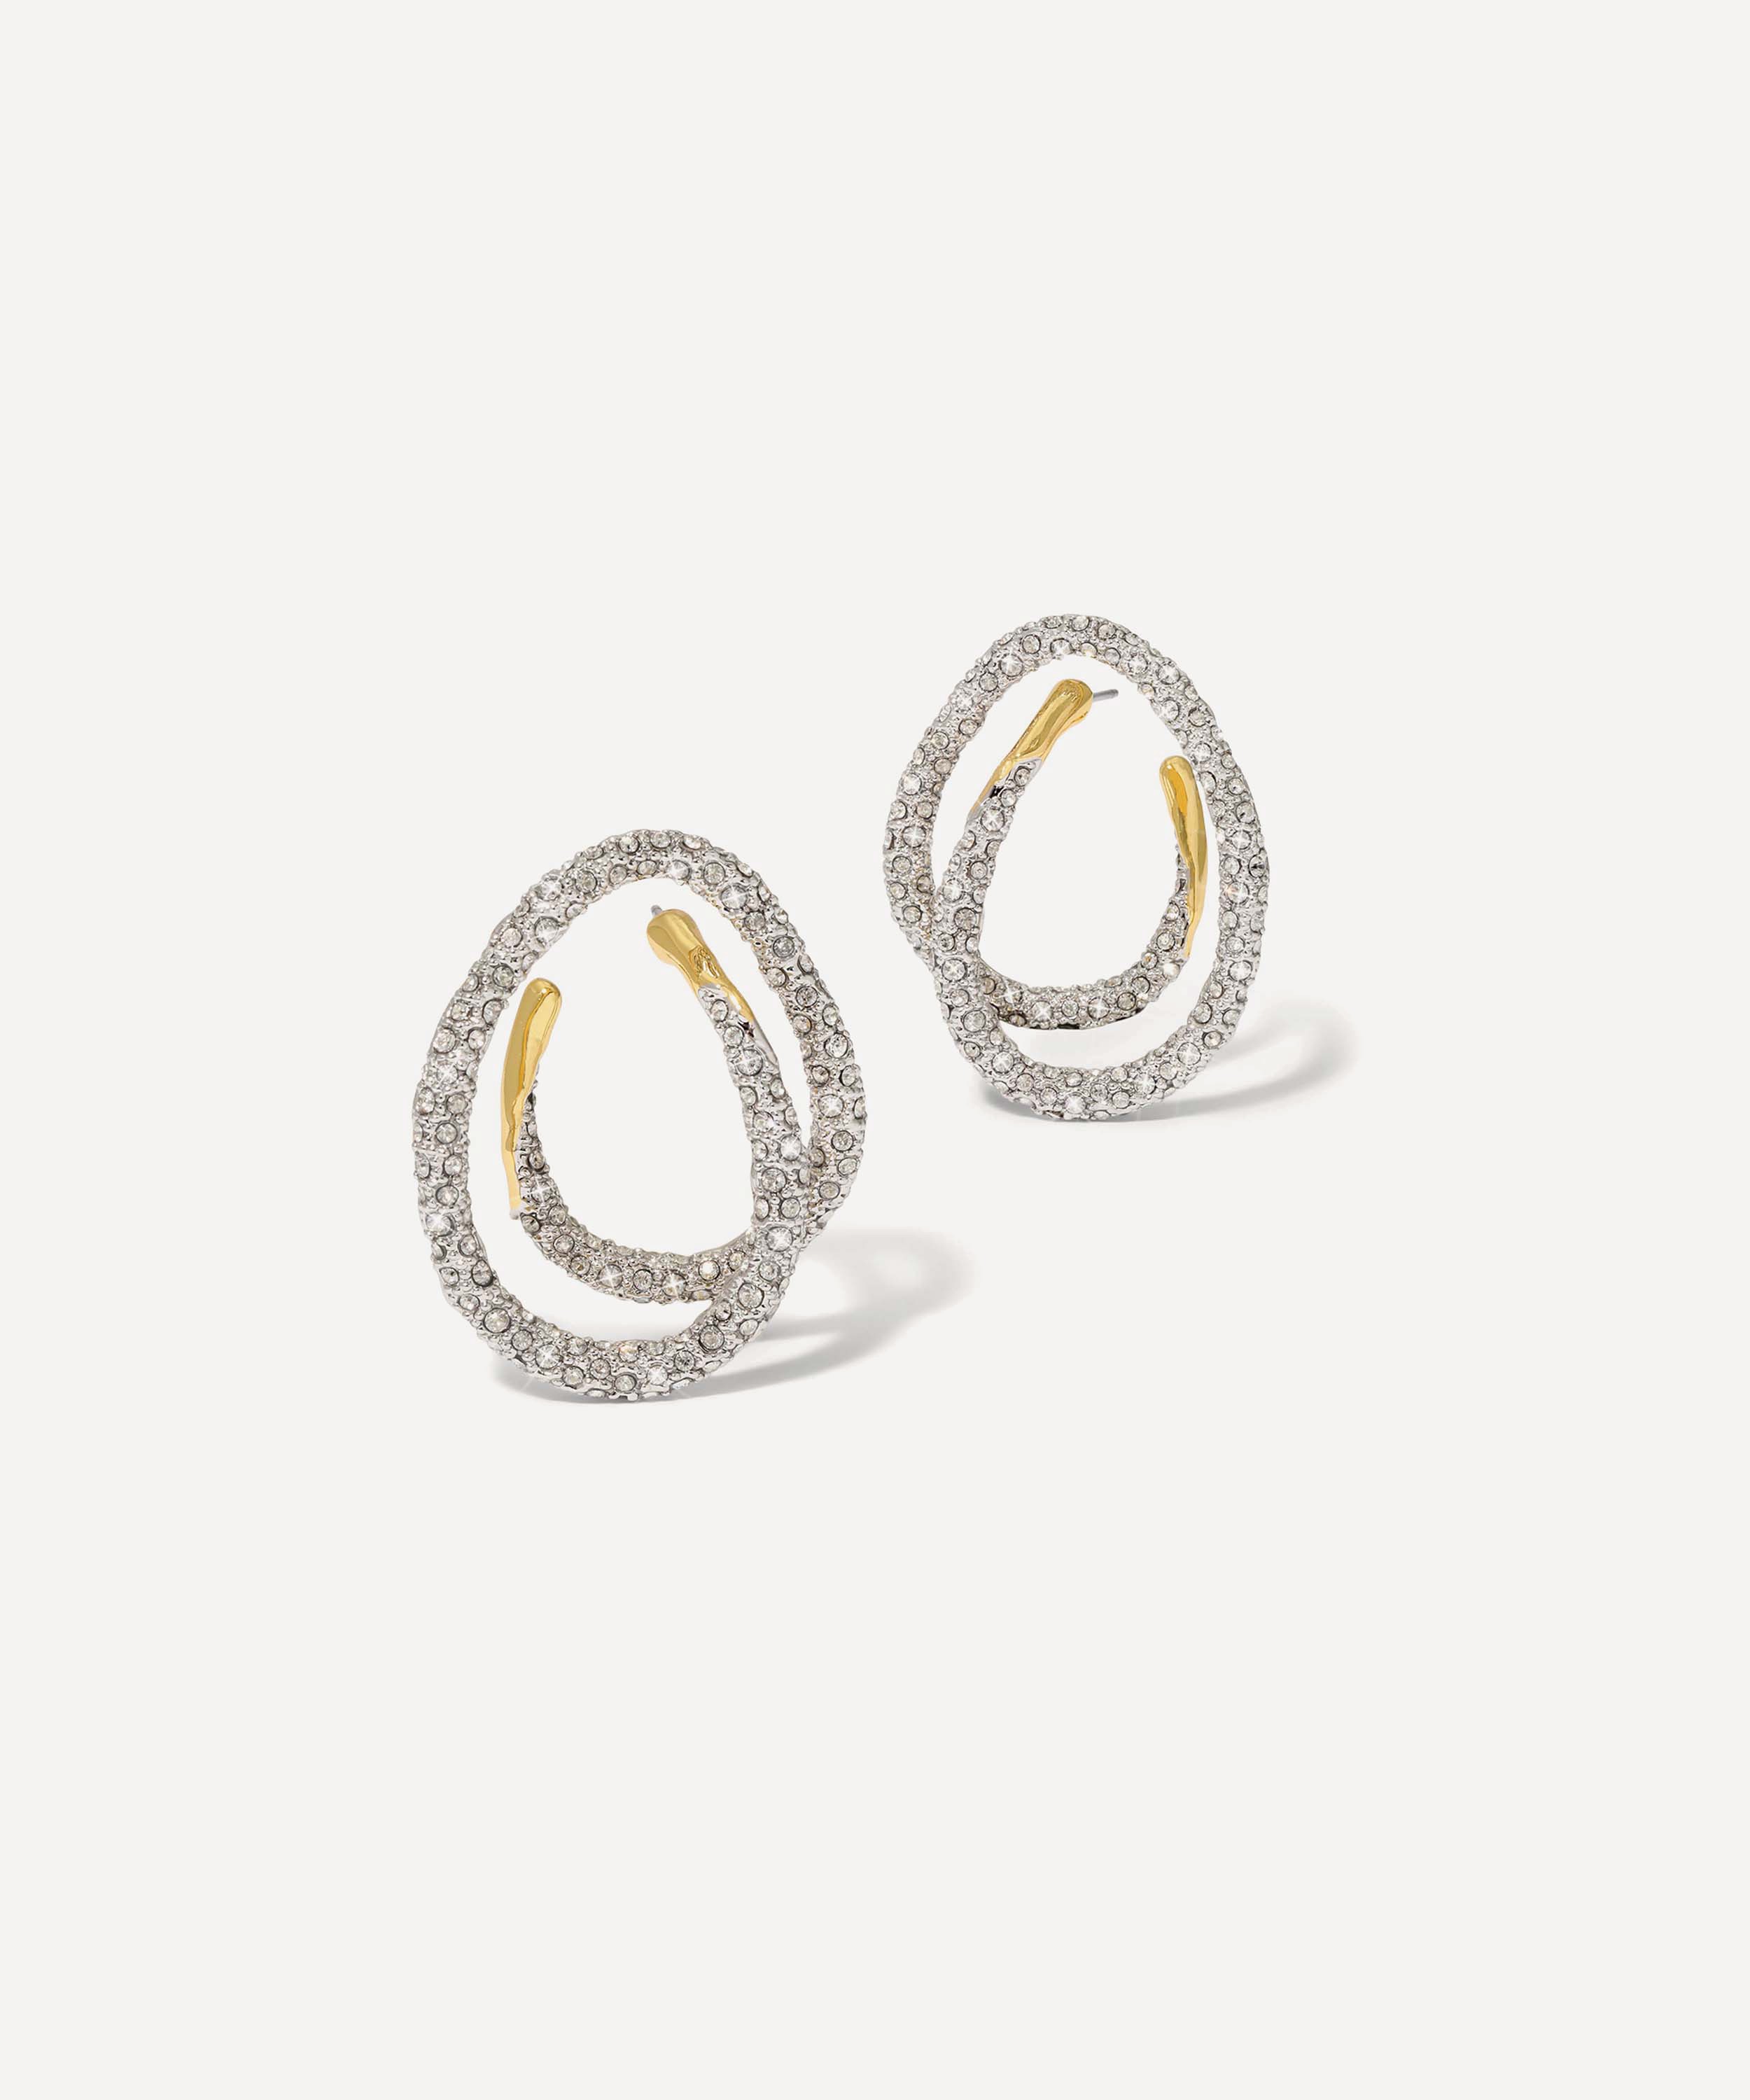 Alexis Bittar - 14ct Gold-Plated Solanales Crystal Spiral Earrings